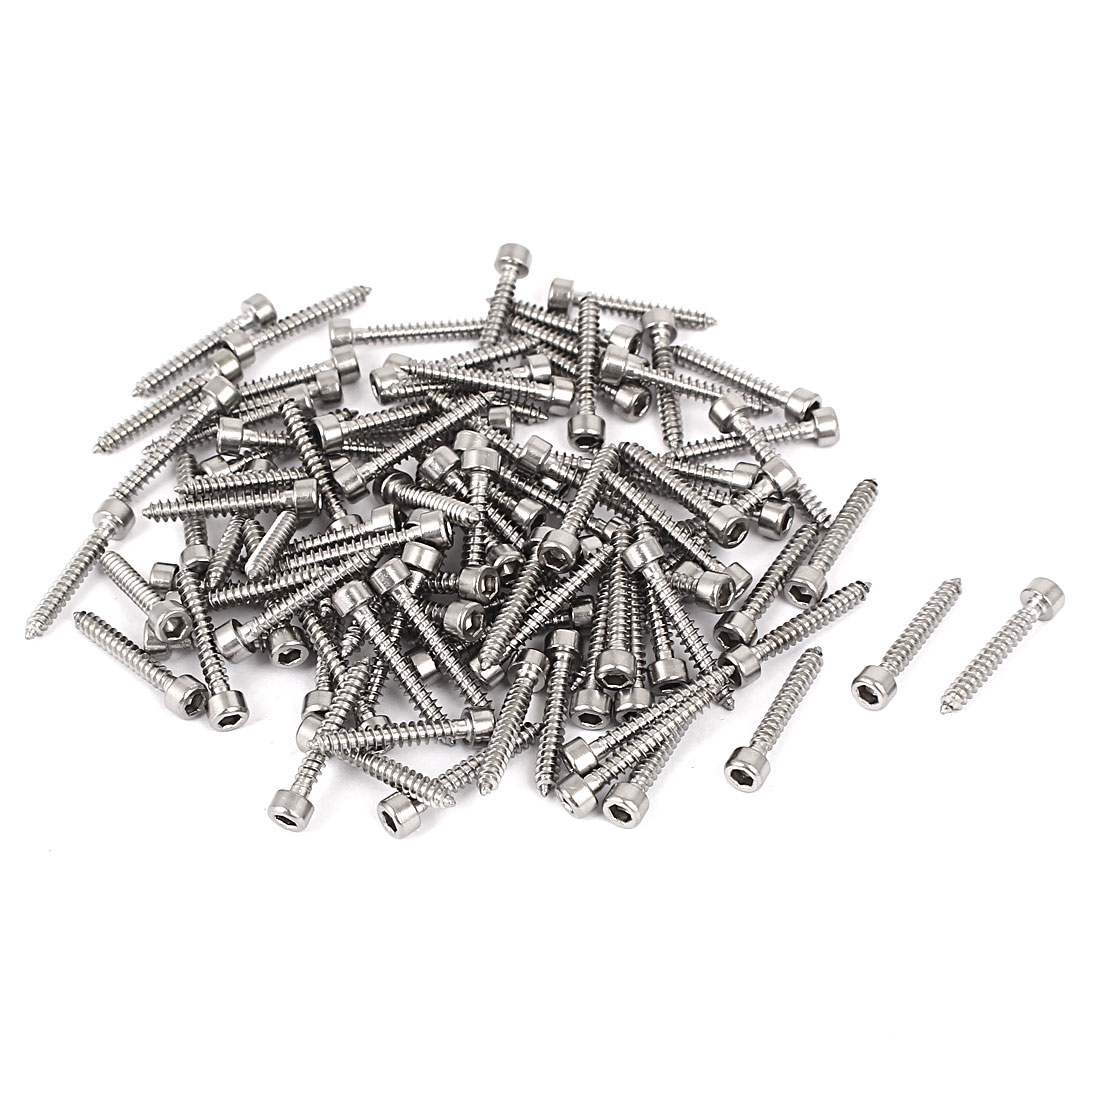 Uxcell M3 x 20mm Threaded Nickel Plated Hex Head Self Tapping Screws (100-pack) - image 1 of 2